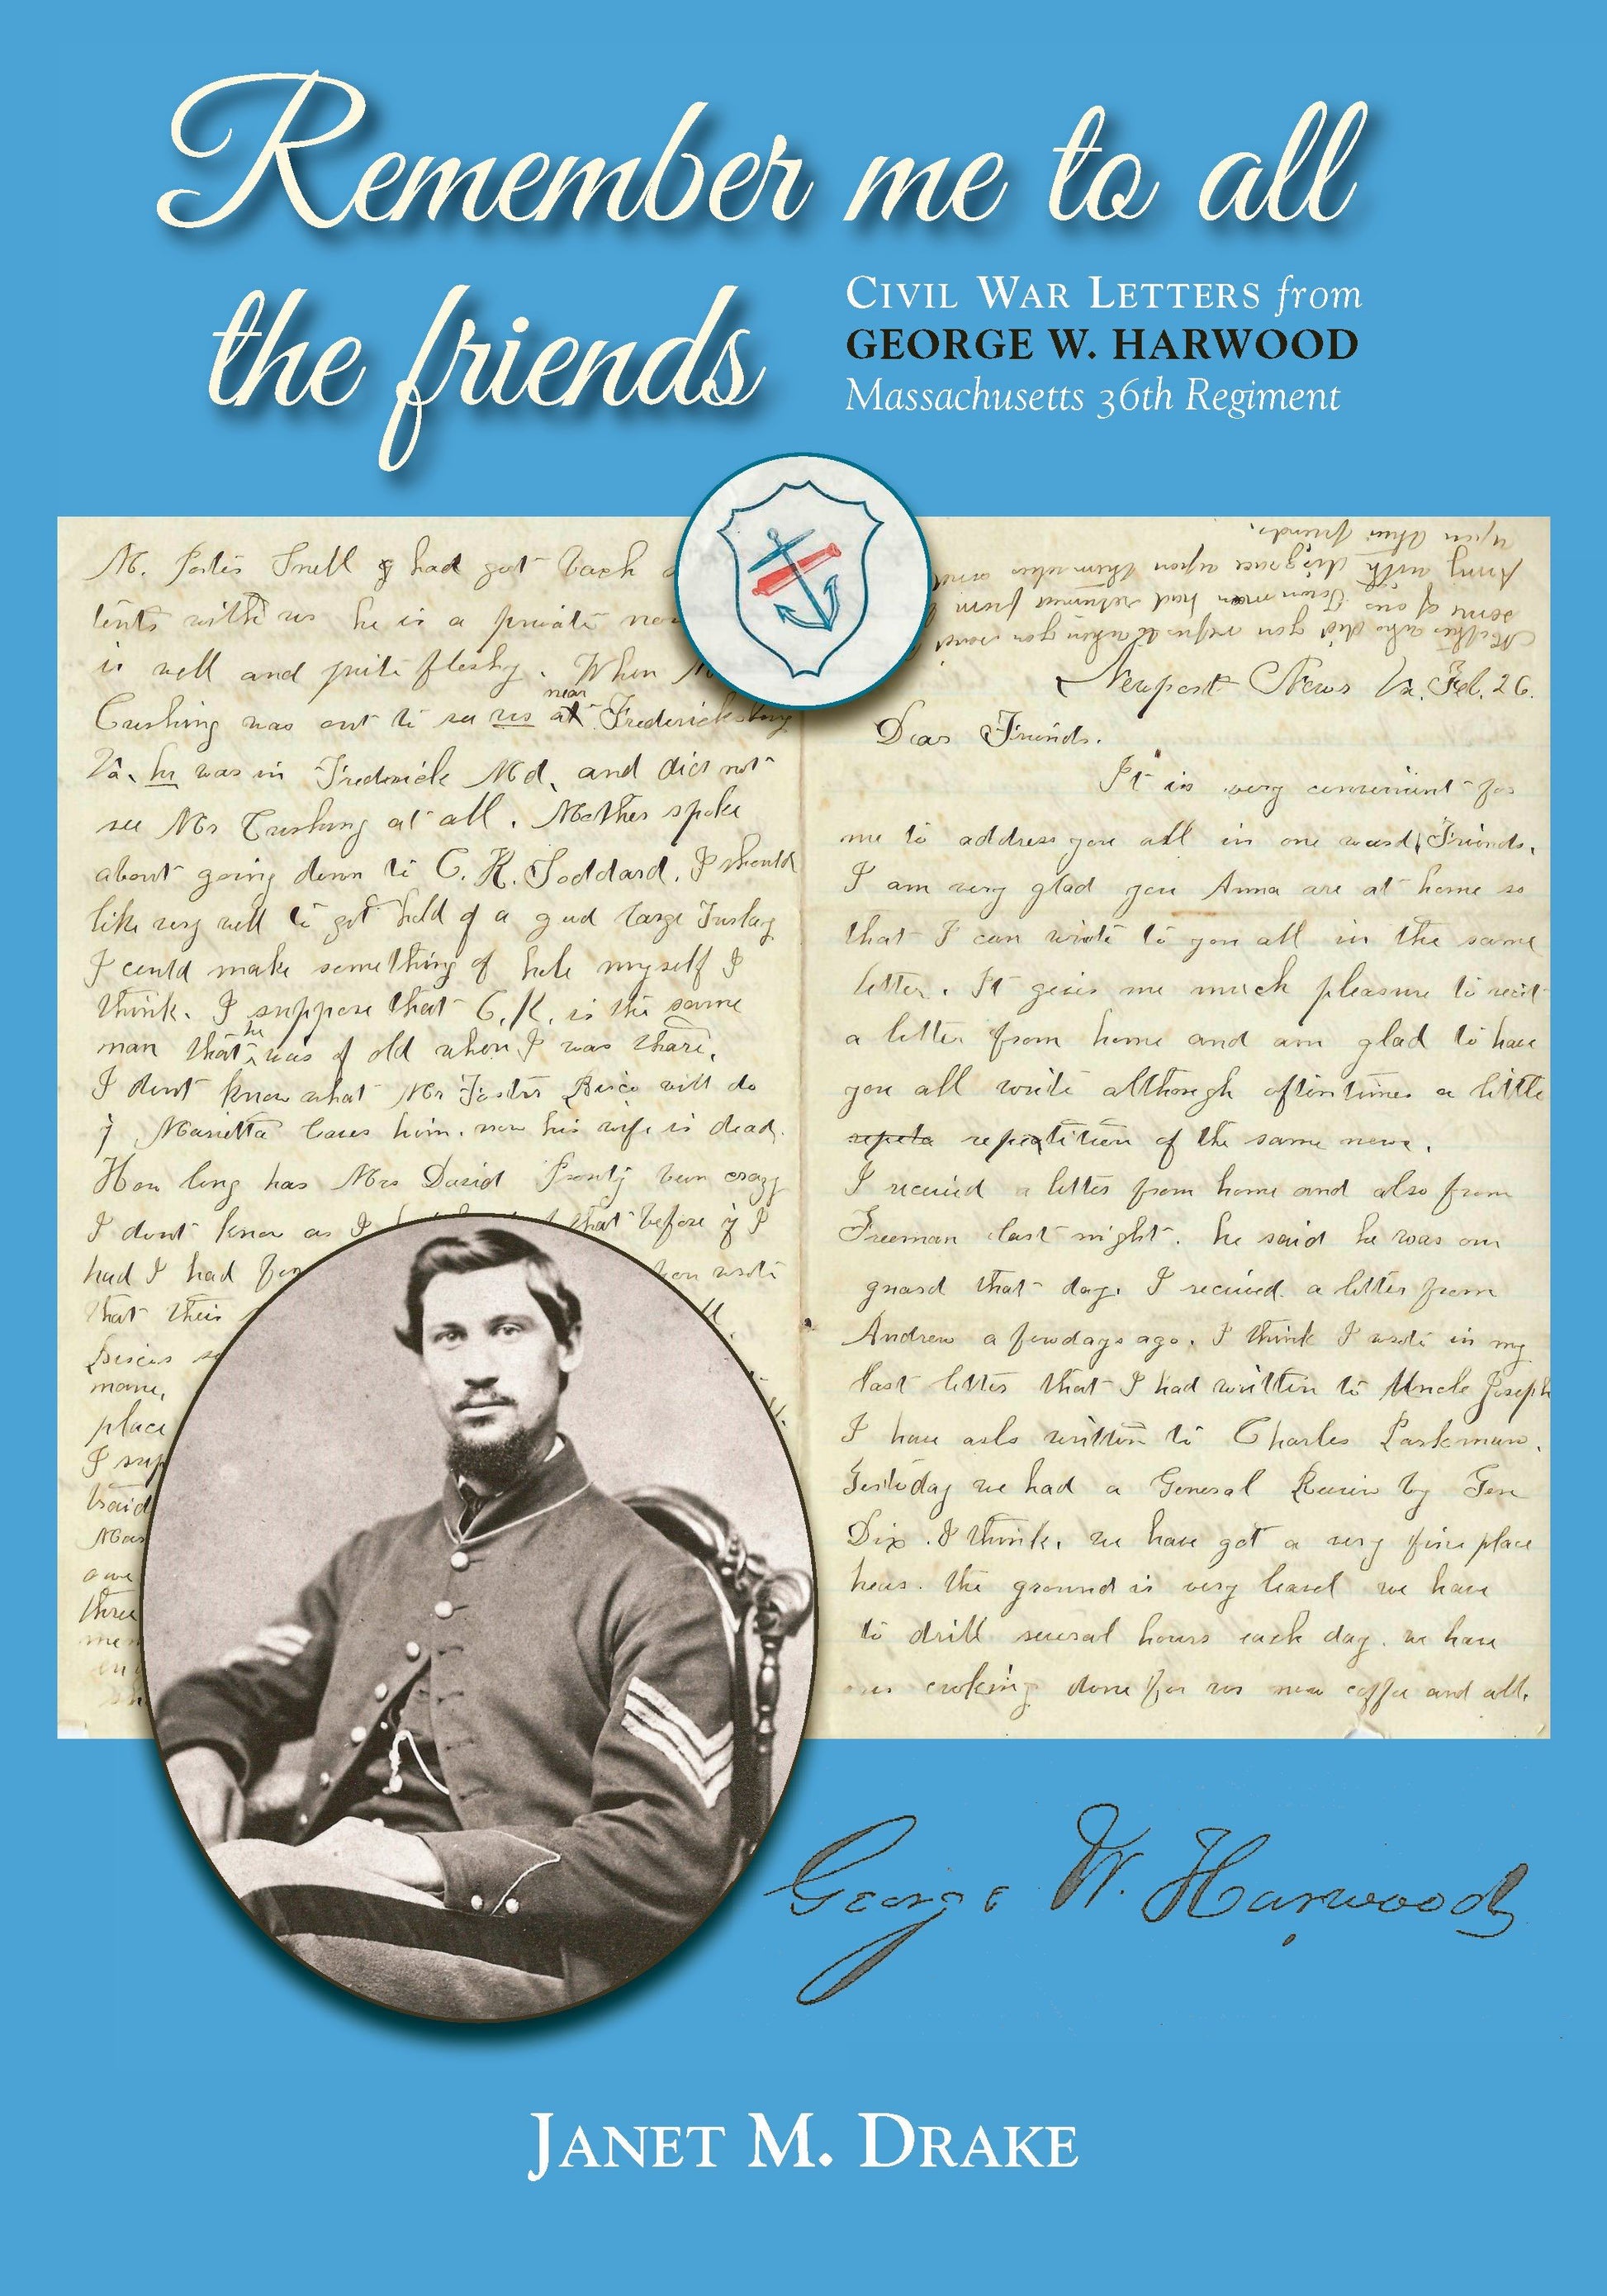 Remember me to all the friends: Civil War letters from George W. Harwood, Massachusetts 36th Regiment